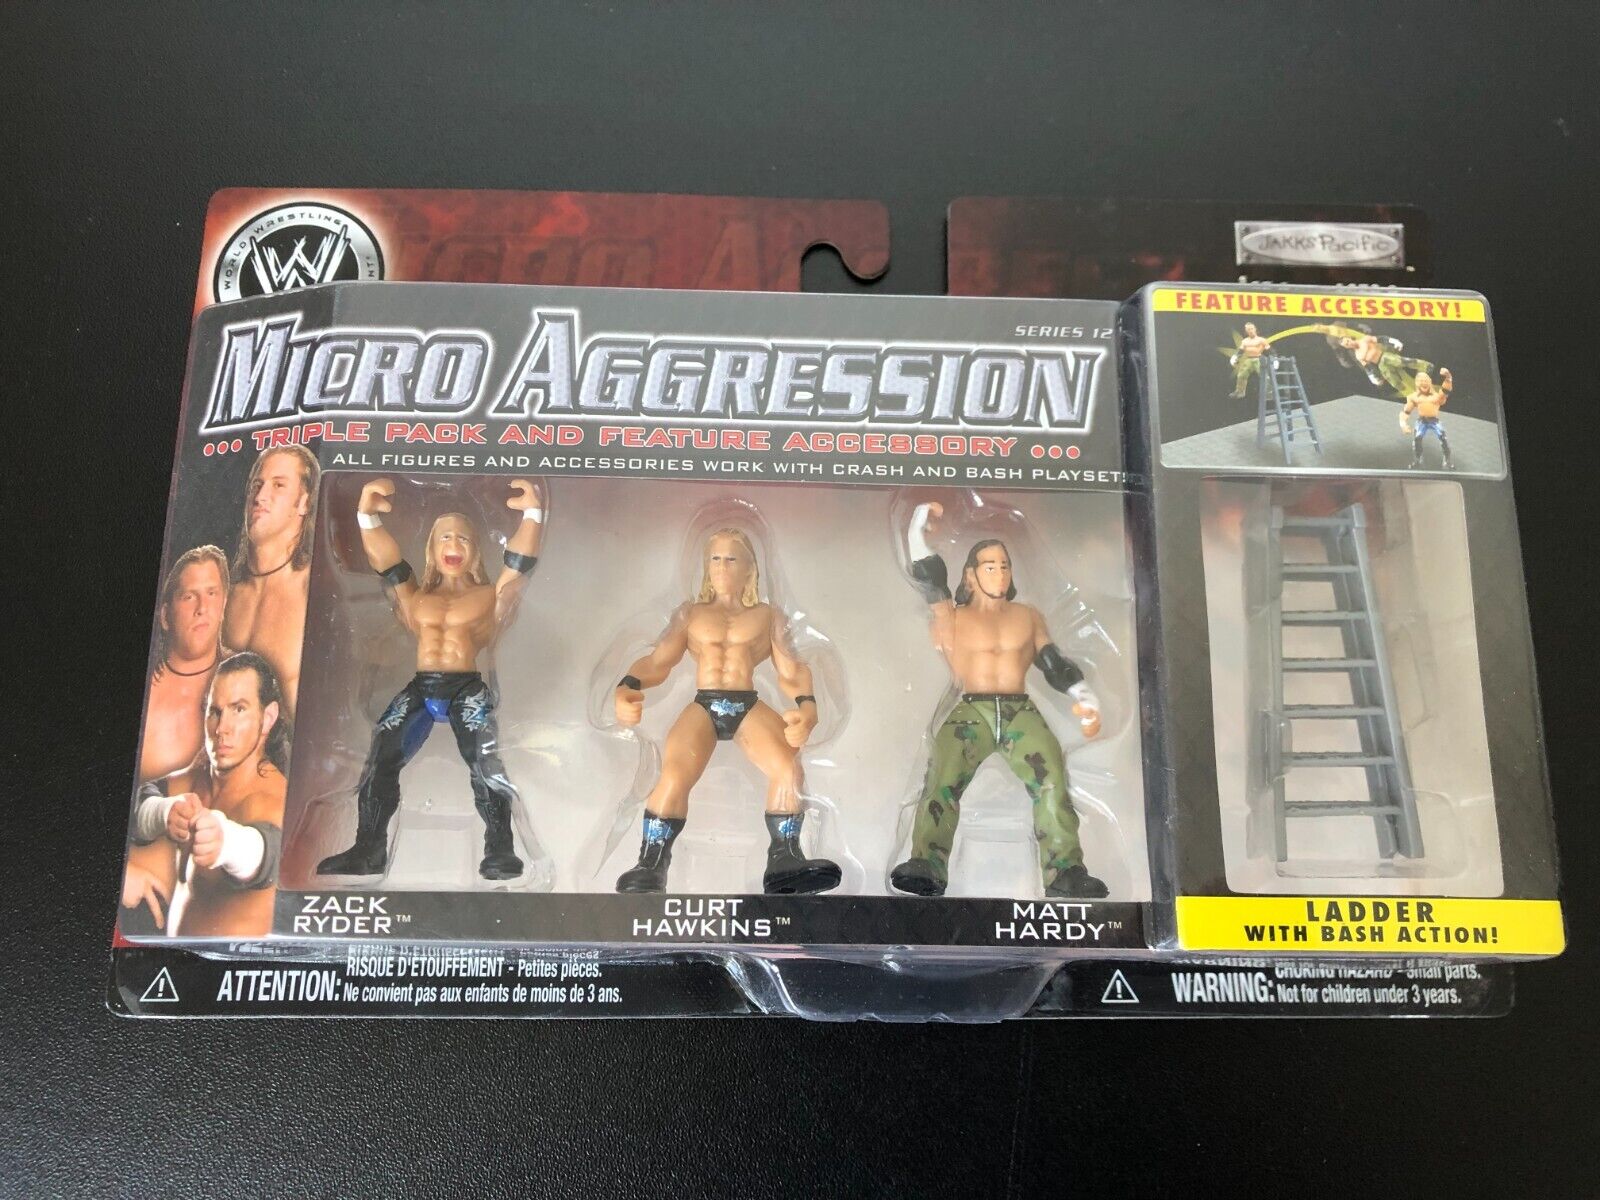 WWE MICRO AGGRESSION SERIES 11 with Ladder - Zack Ryder Curt Hawkins Hard New Original Packaging